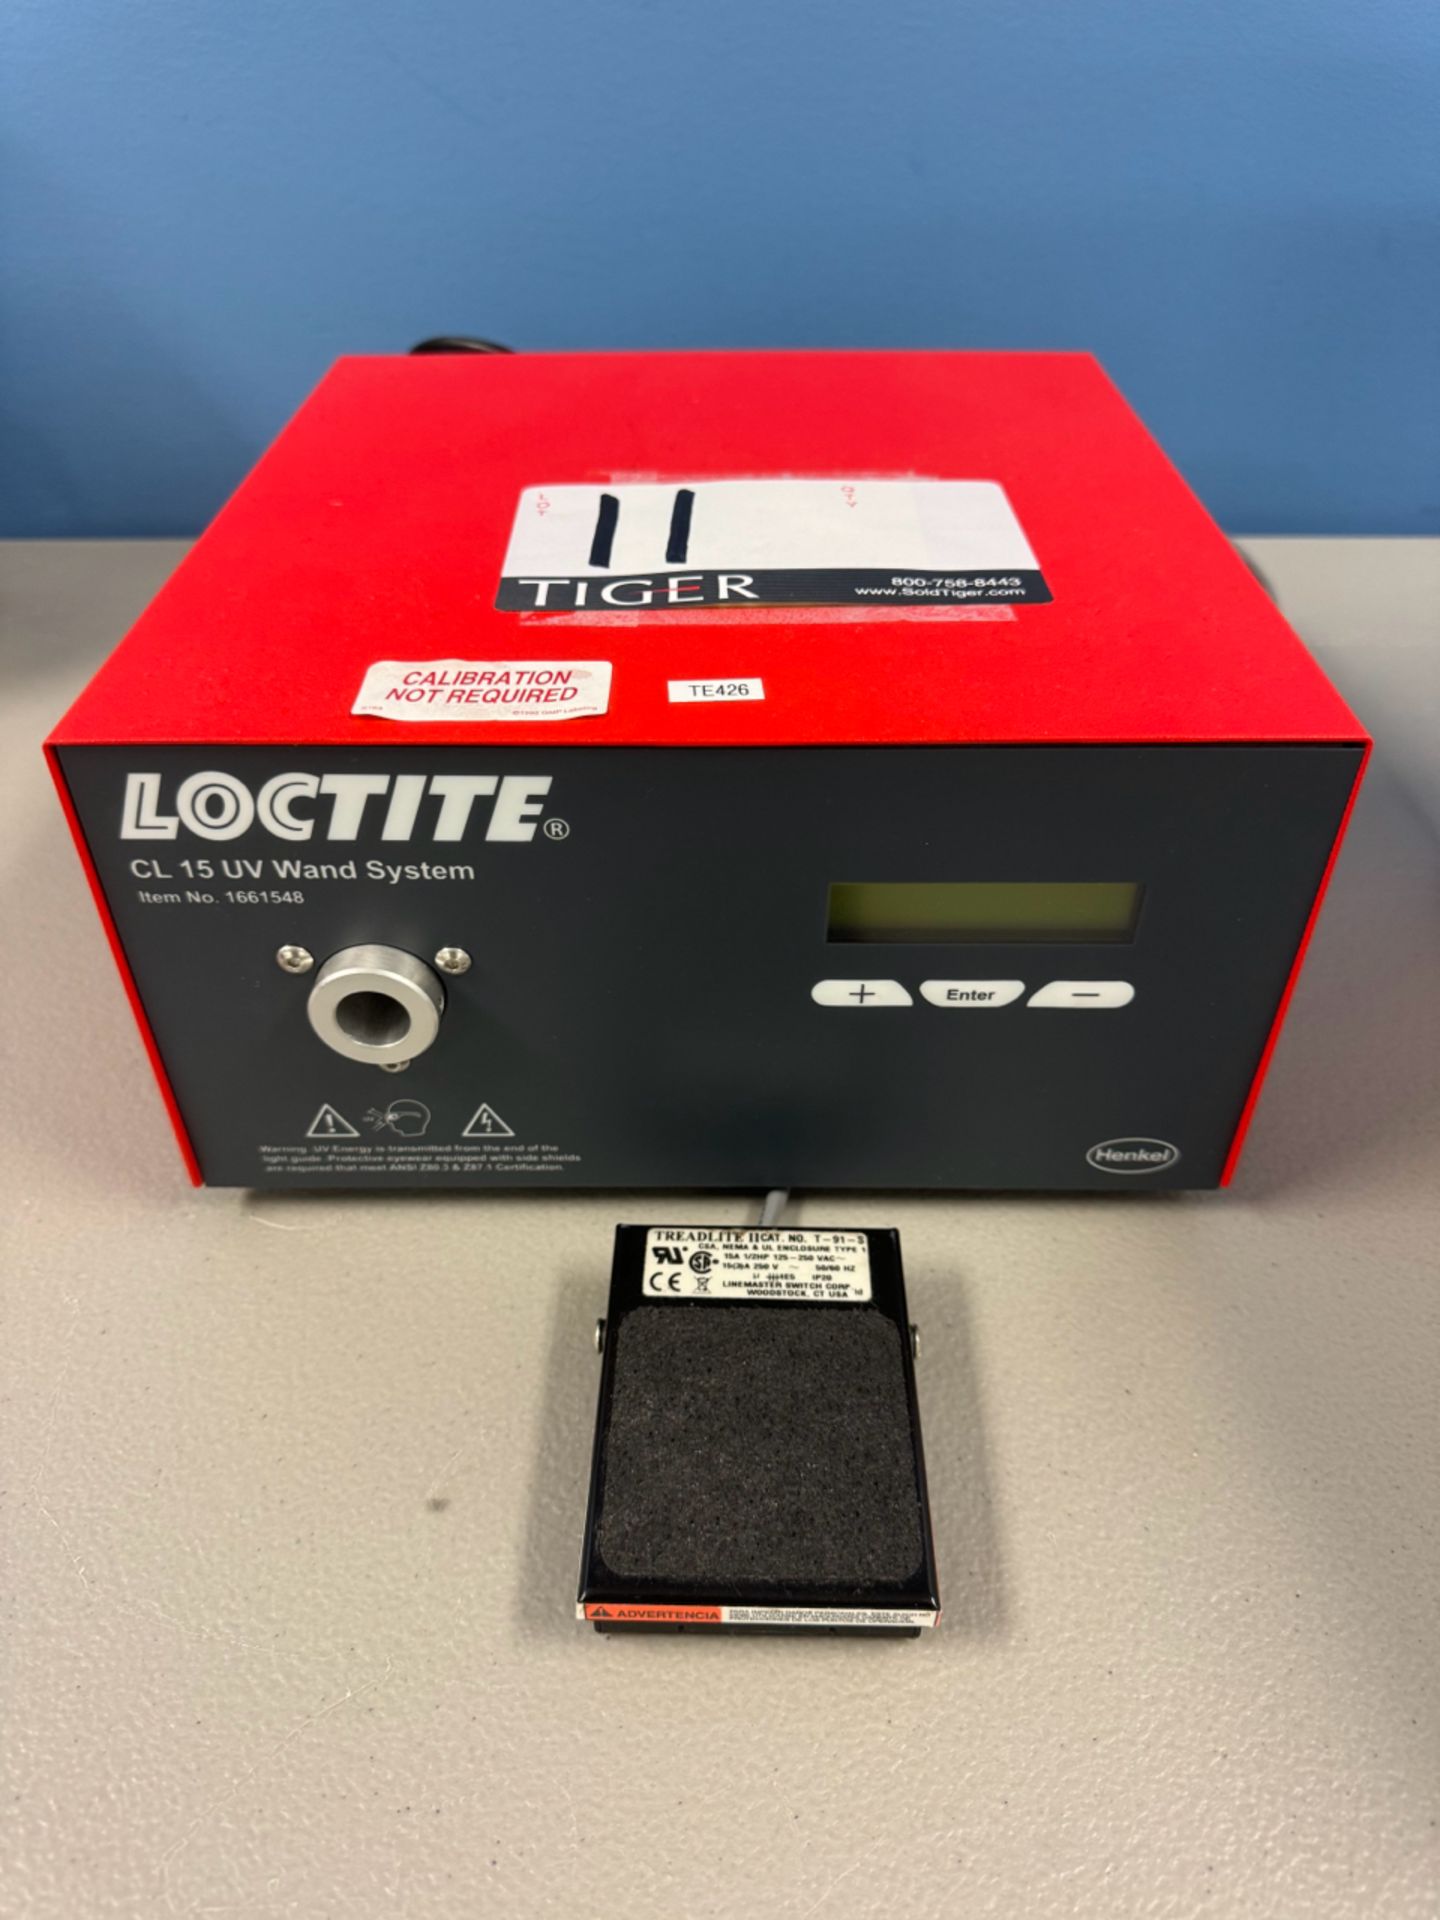 Loctite UV Wand System